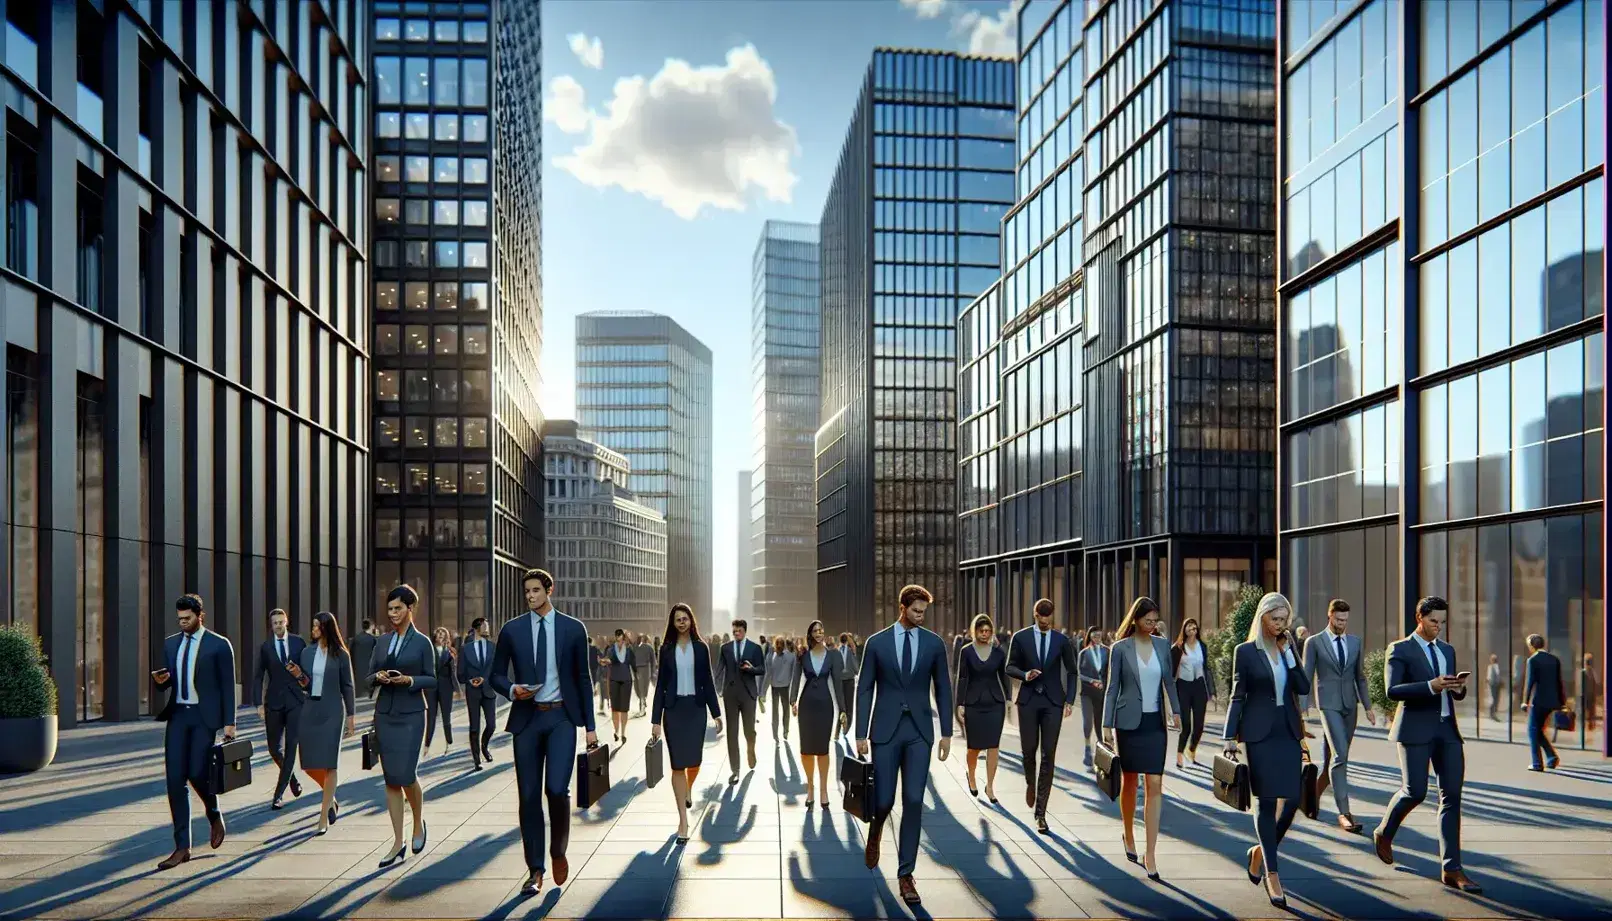 Diverse business professionals walk in a UK financial district with modern glass high-rises reflecting a sunny blue sky.